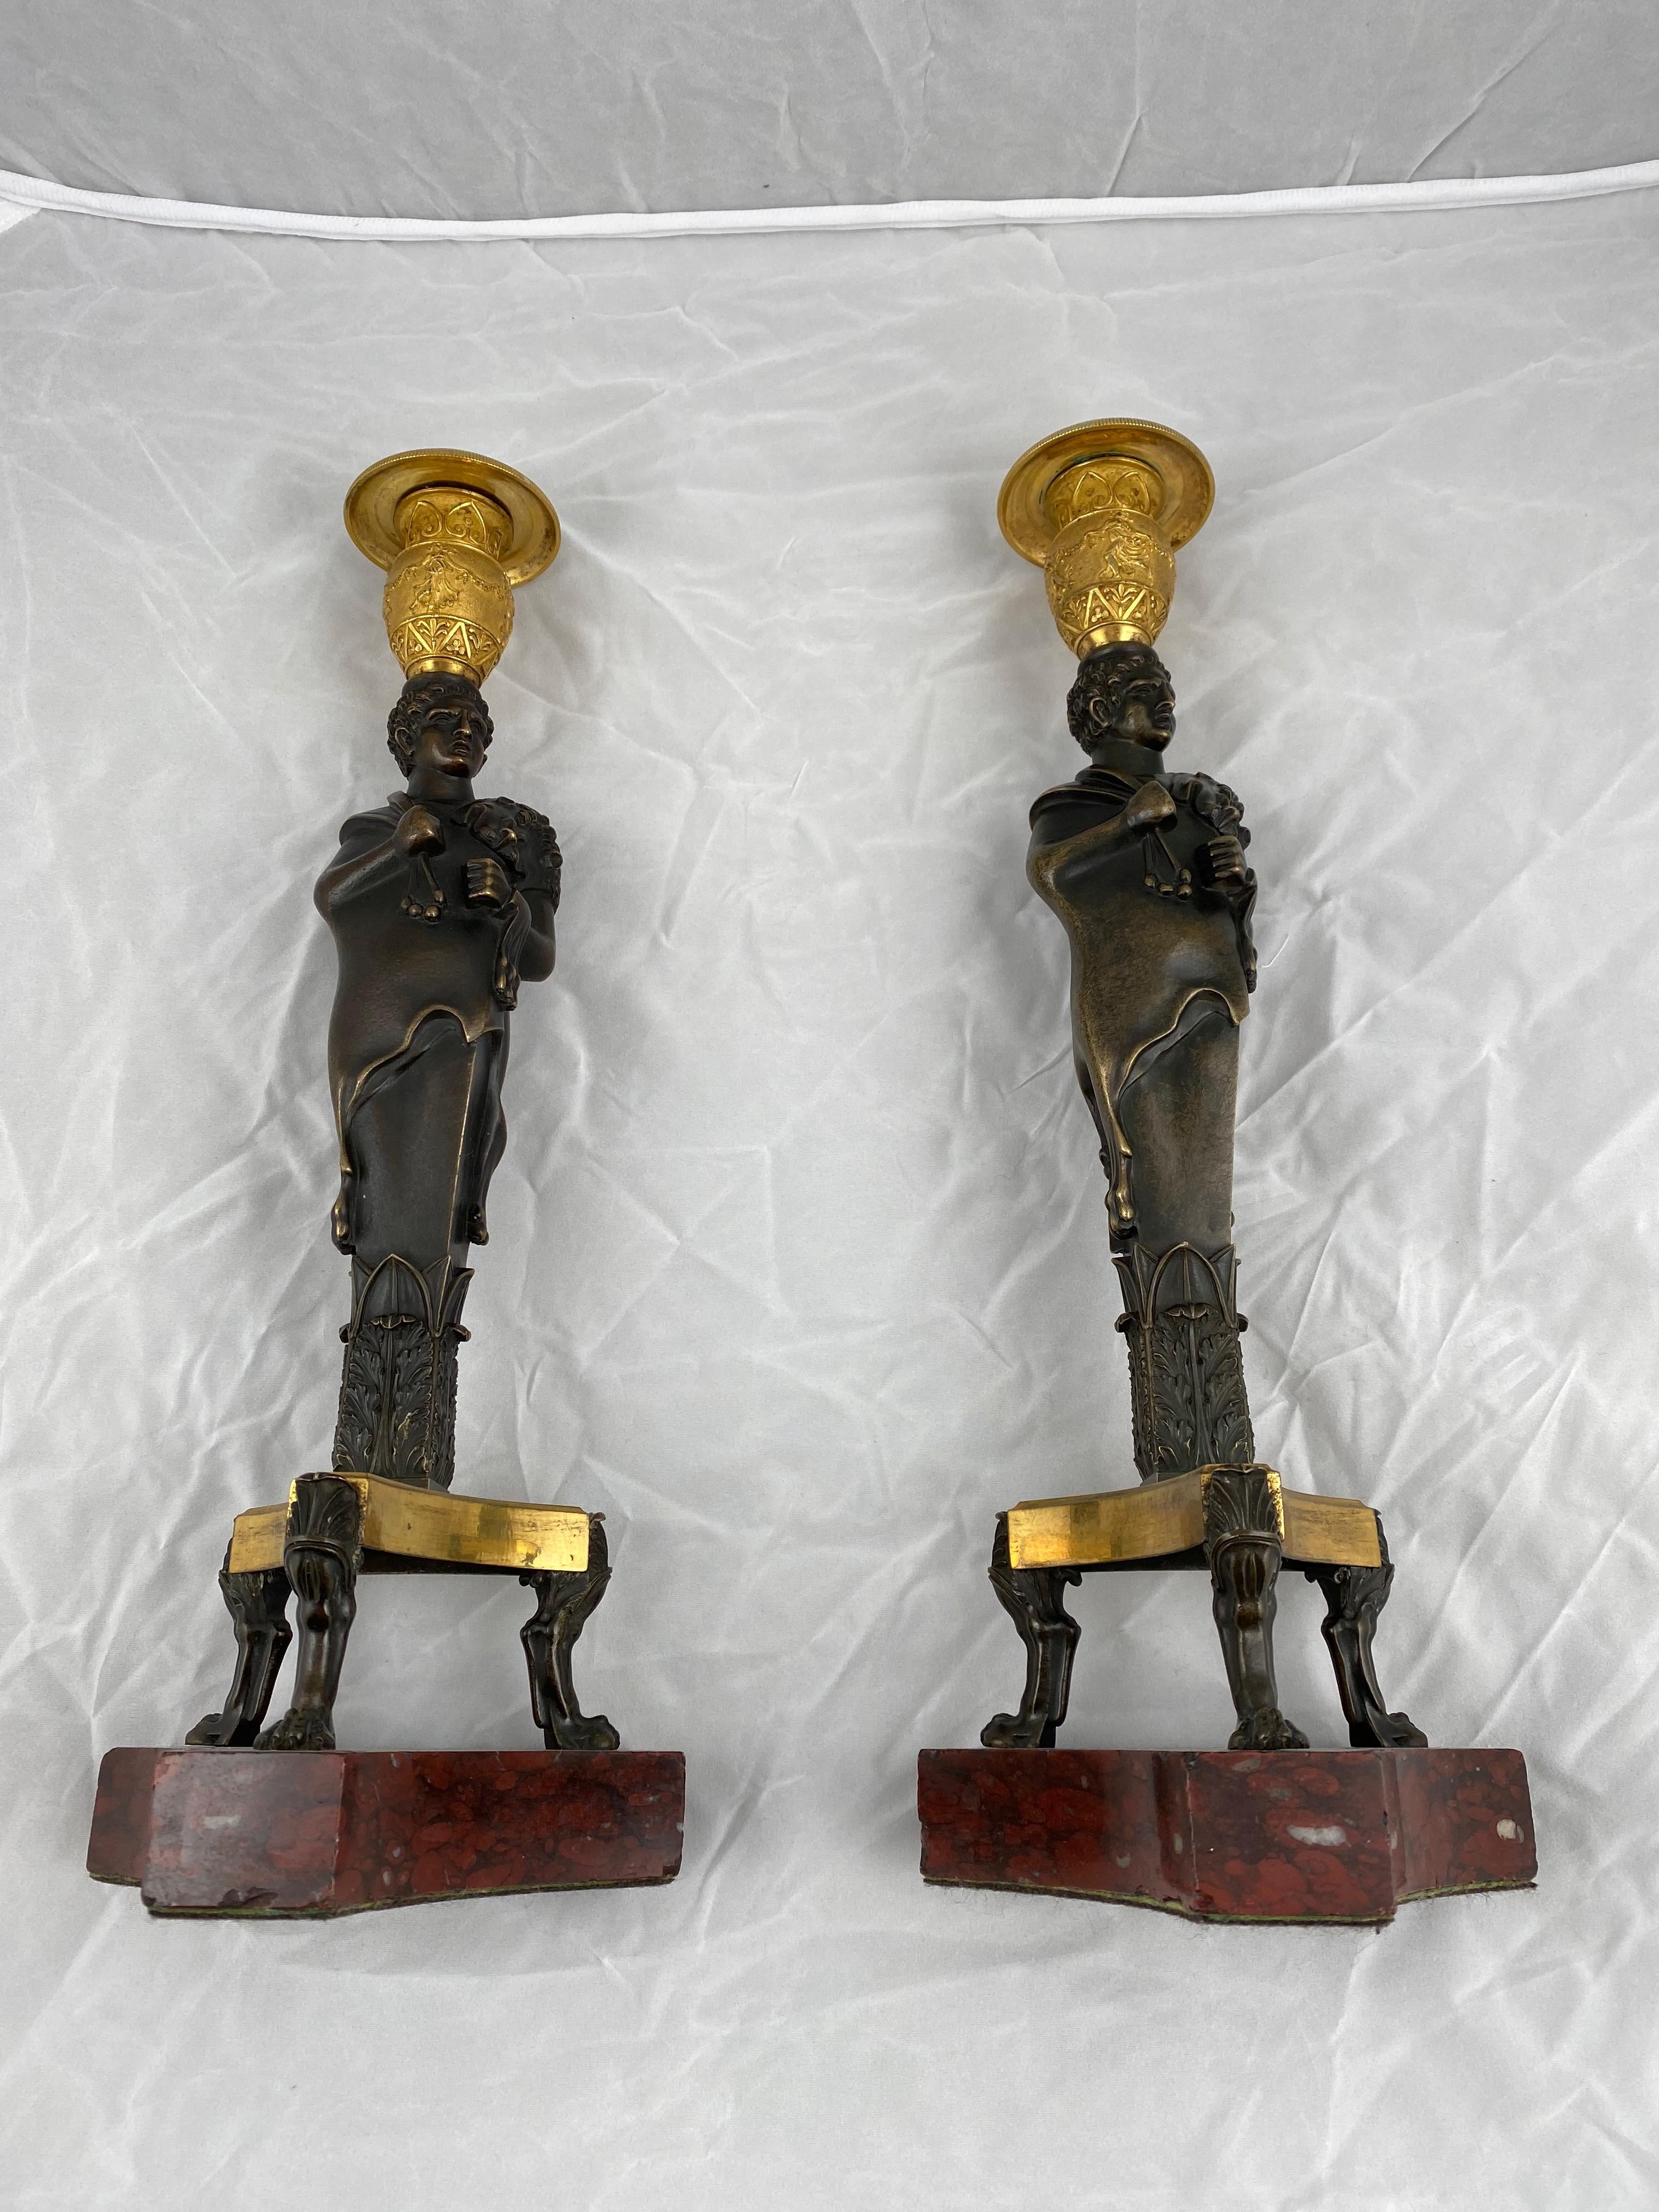 Marble Pair of Candlesticks, French Empire Made, circa 1810